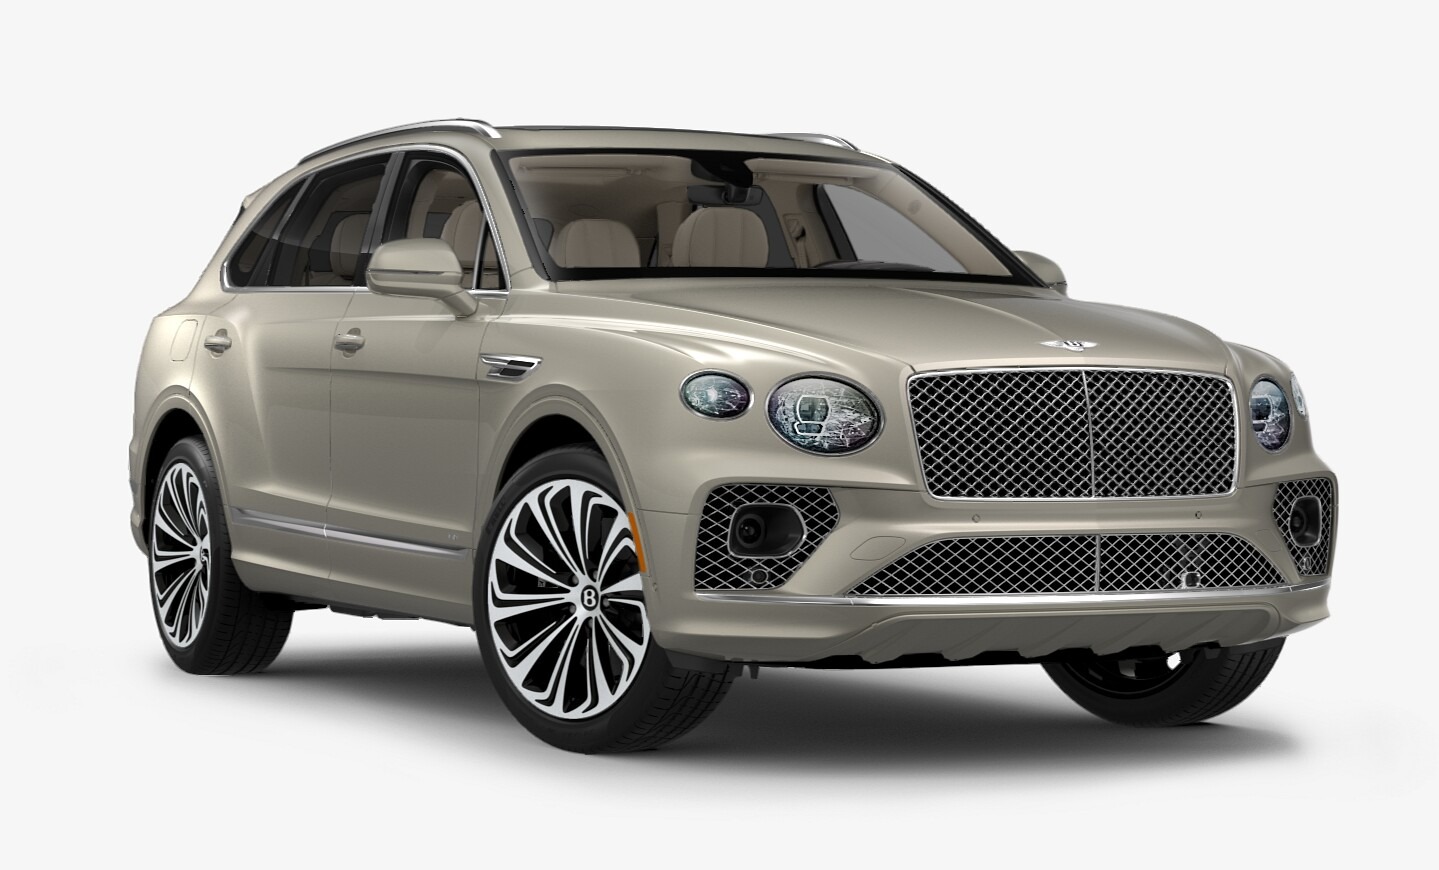 New 2022 Bentley Bentayga V8 for sale Call for price at Maserati of Greenwich in Greenwich CT 06830 1